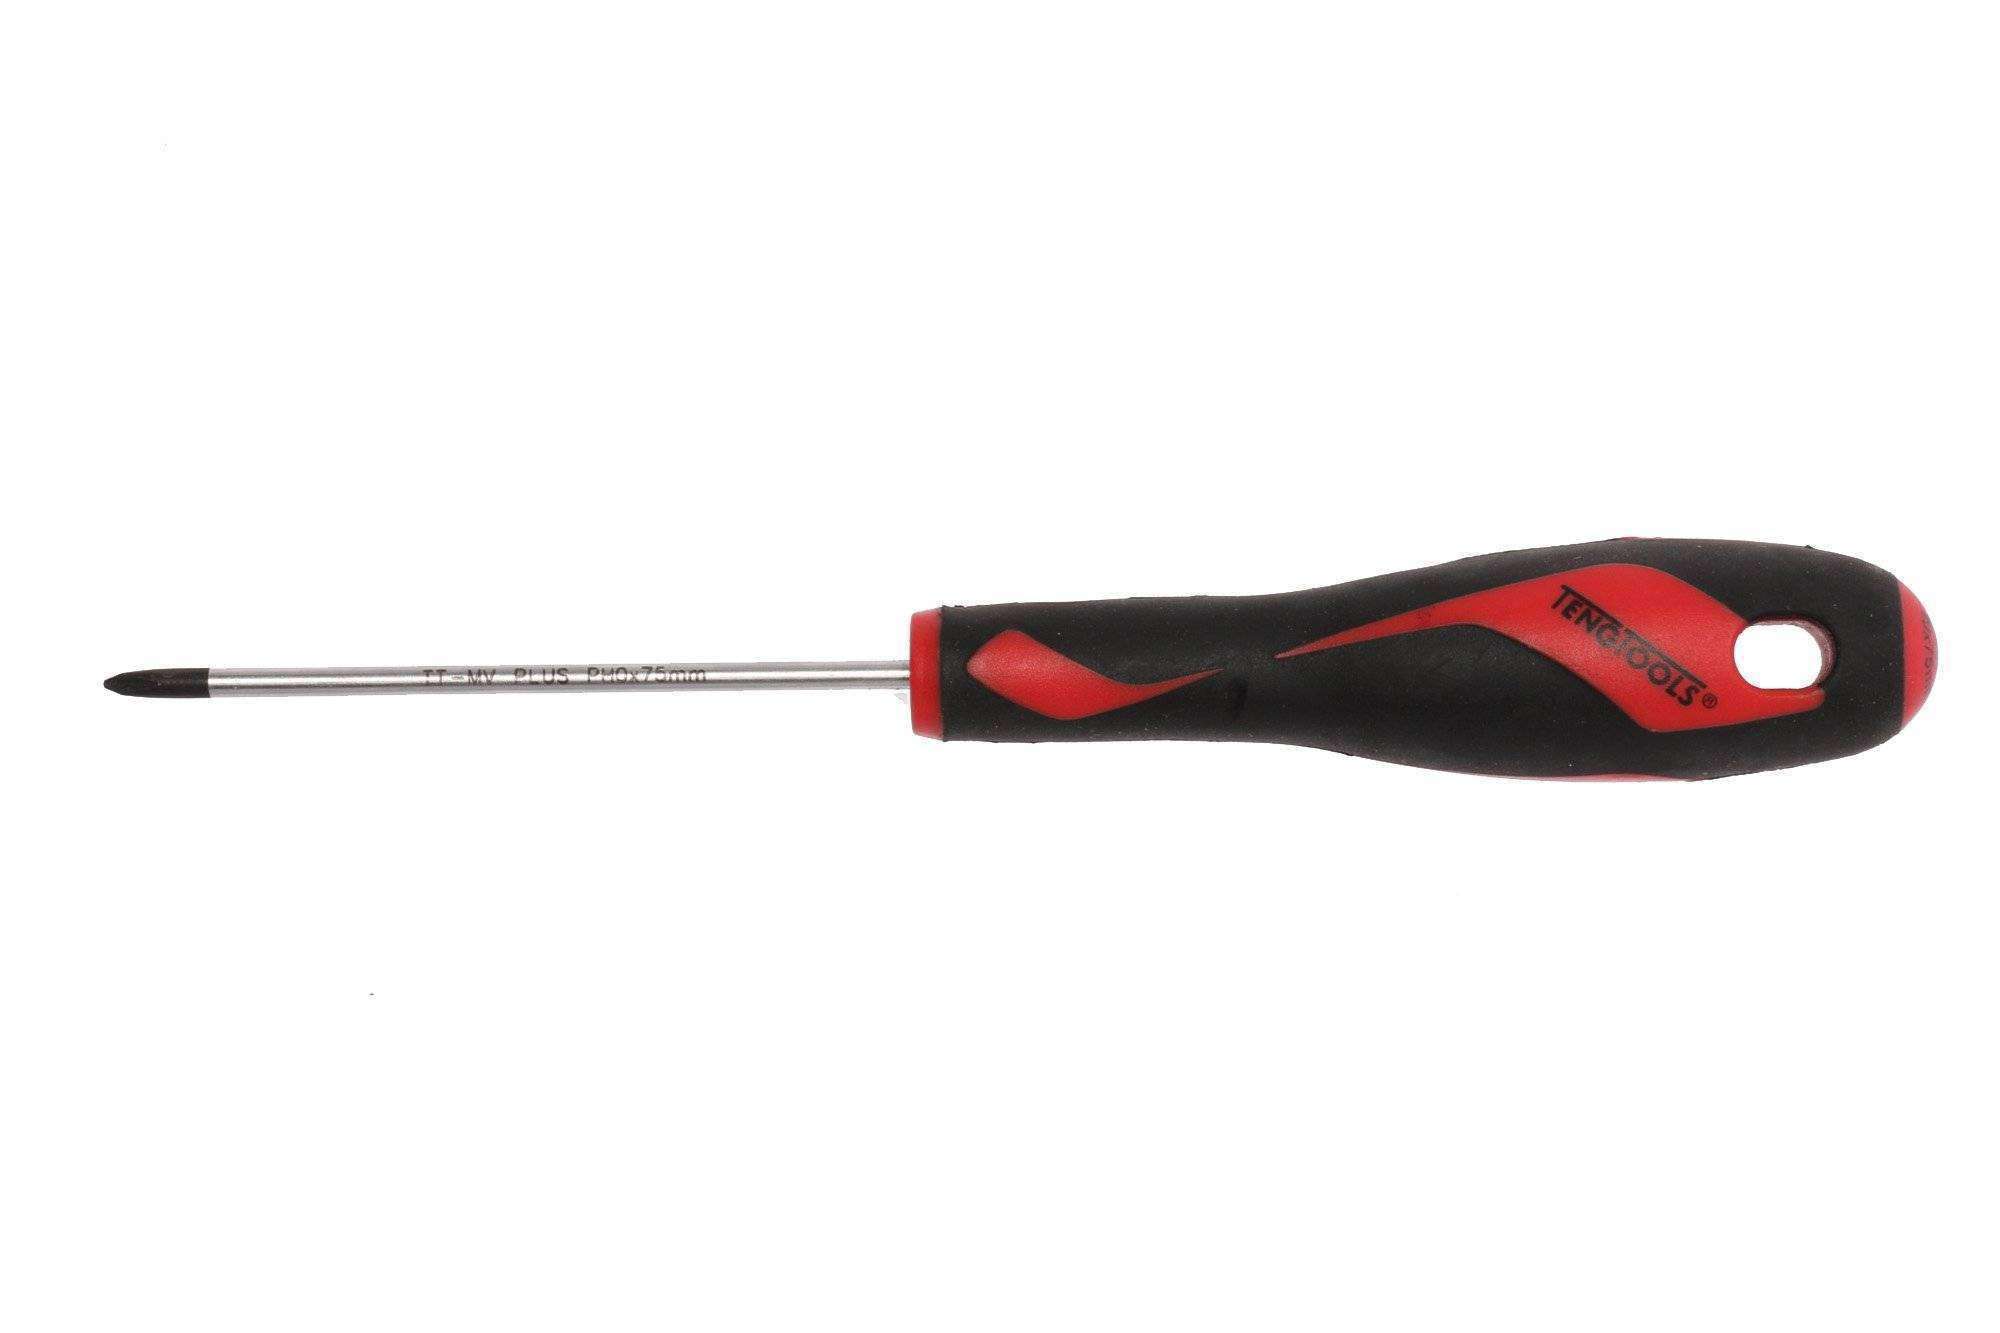 Teng Tools PH0 x 3 Inch / 75mm Head Phillips Screwdriver with Ergonomic, Comfortable Handle - MD940N